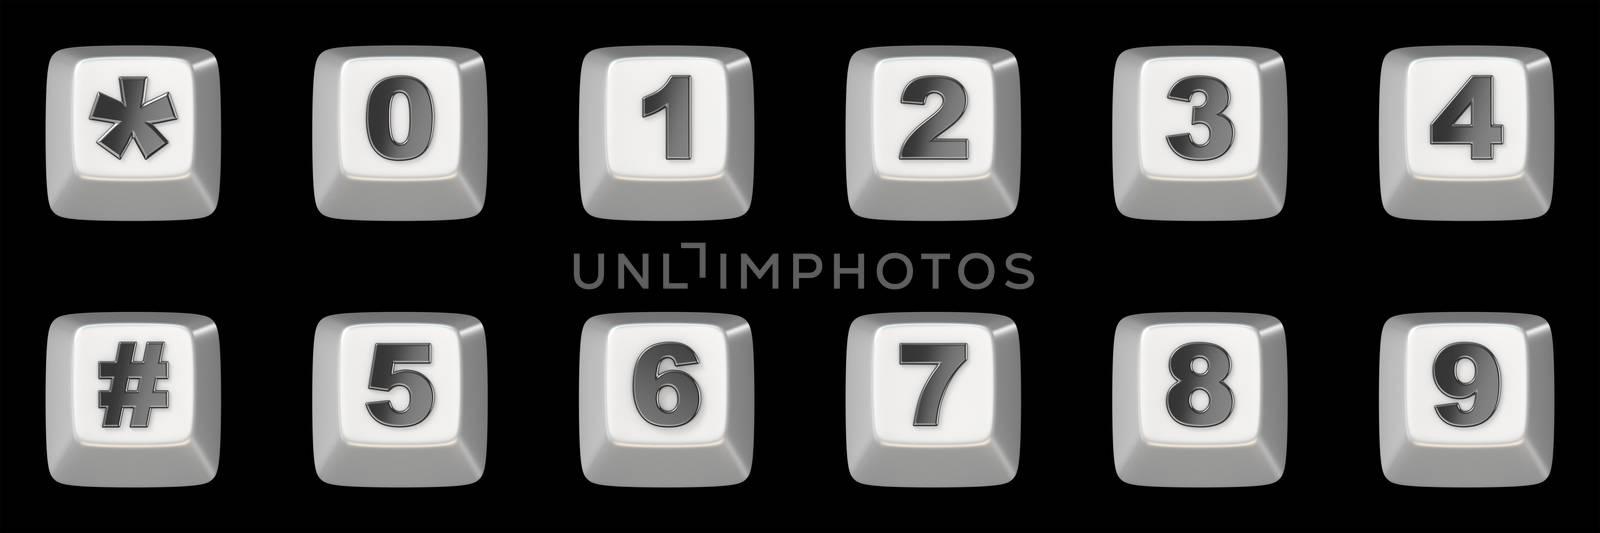 Computer keyboard key NUMBERS 3D render illustration isolated on black background